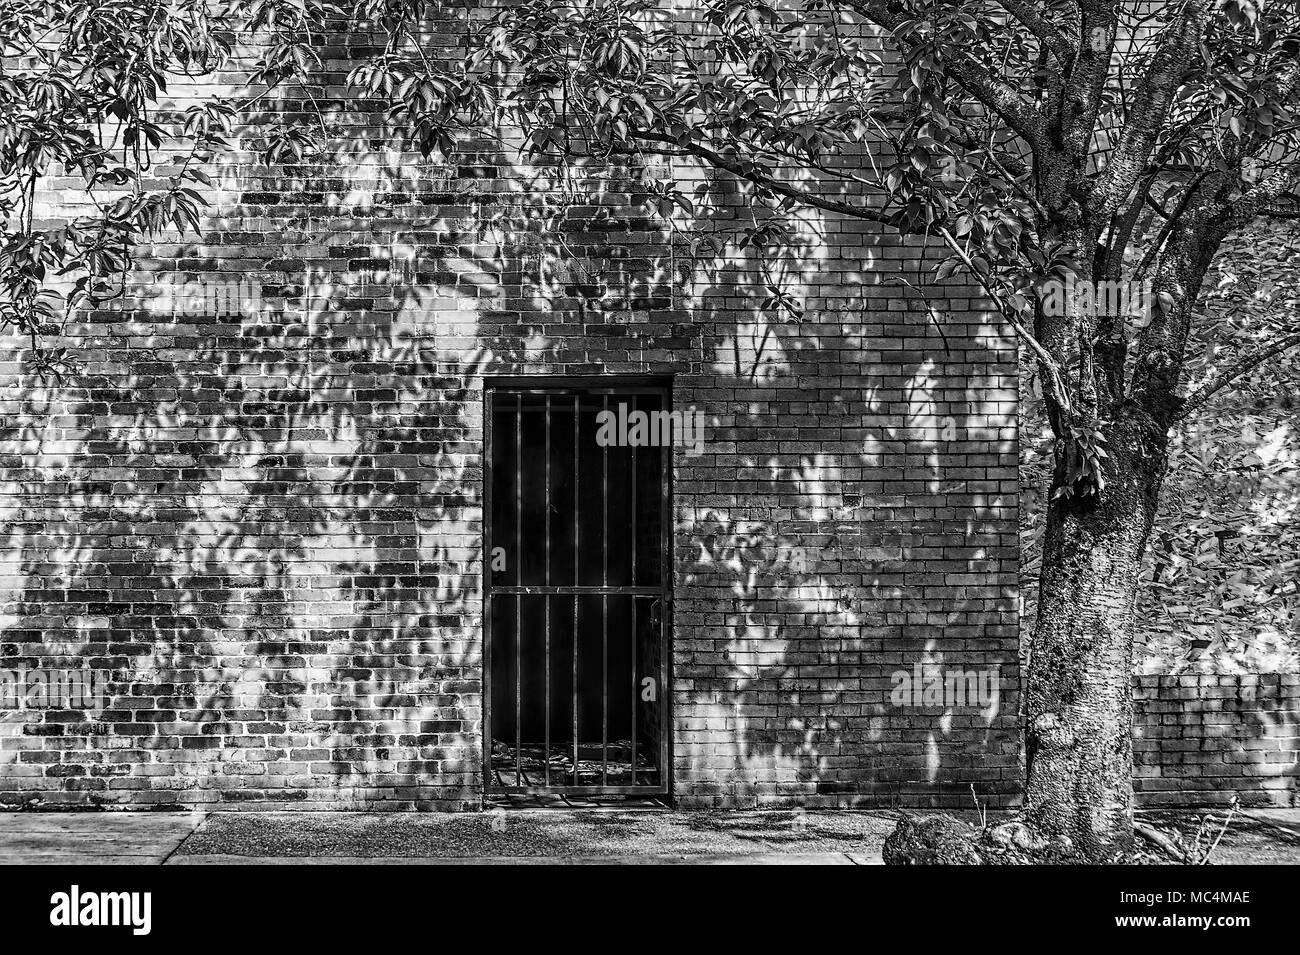 Black and white of brick building with iron gated entrance and a tree. Stock Photo